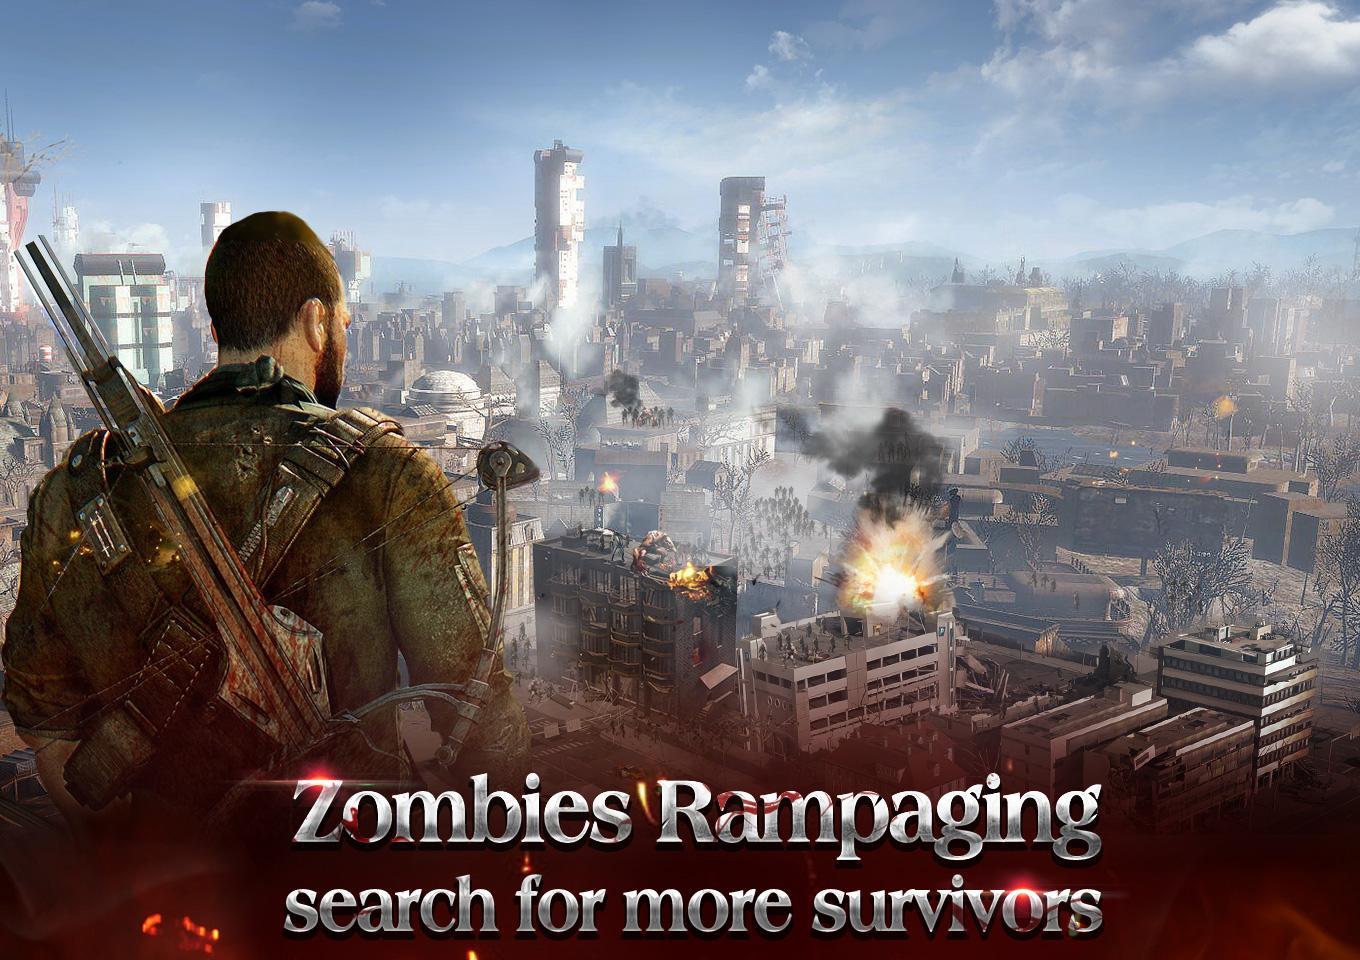 LINE War Z 2 for Android - APK Download